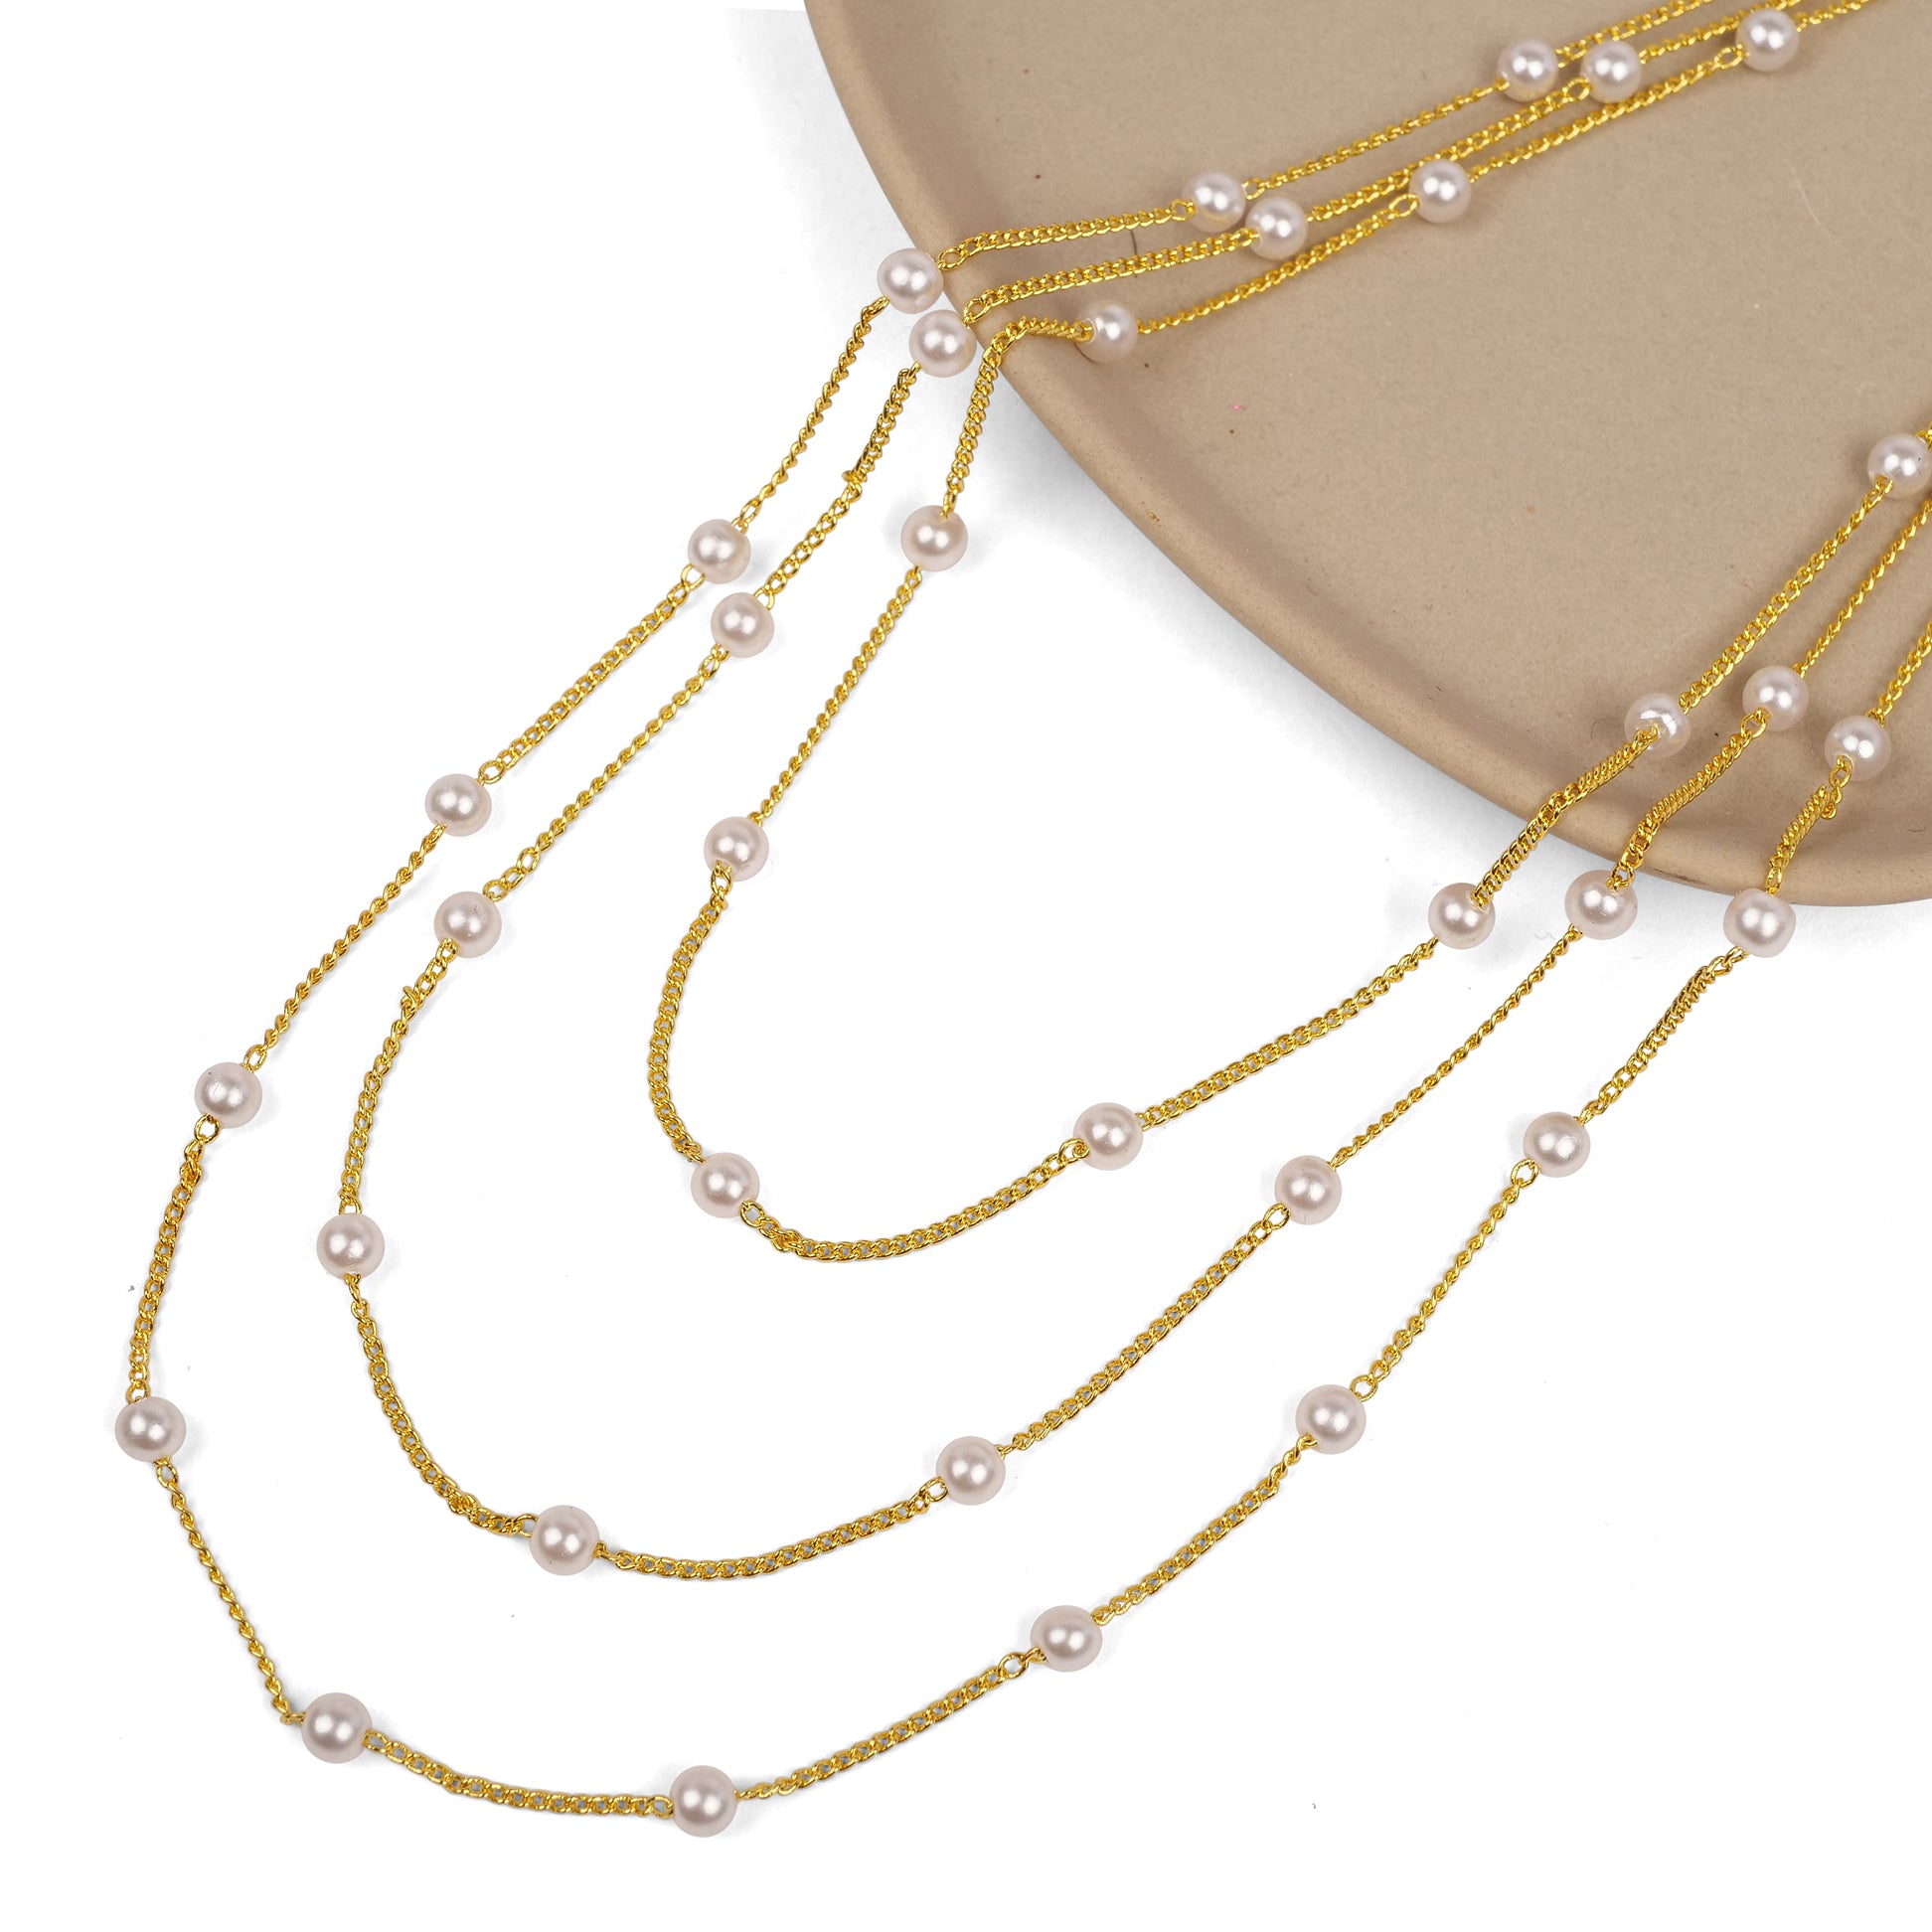 Triple Layer Pearl Chain in Gold